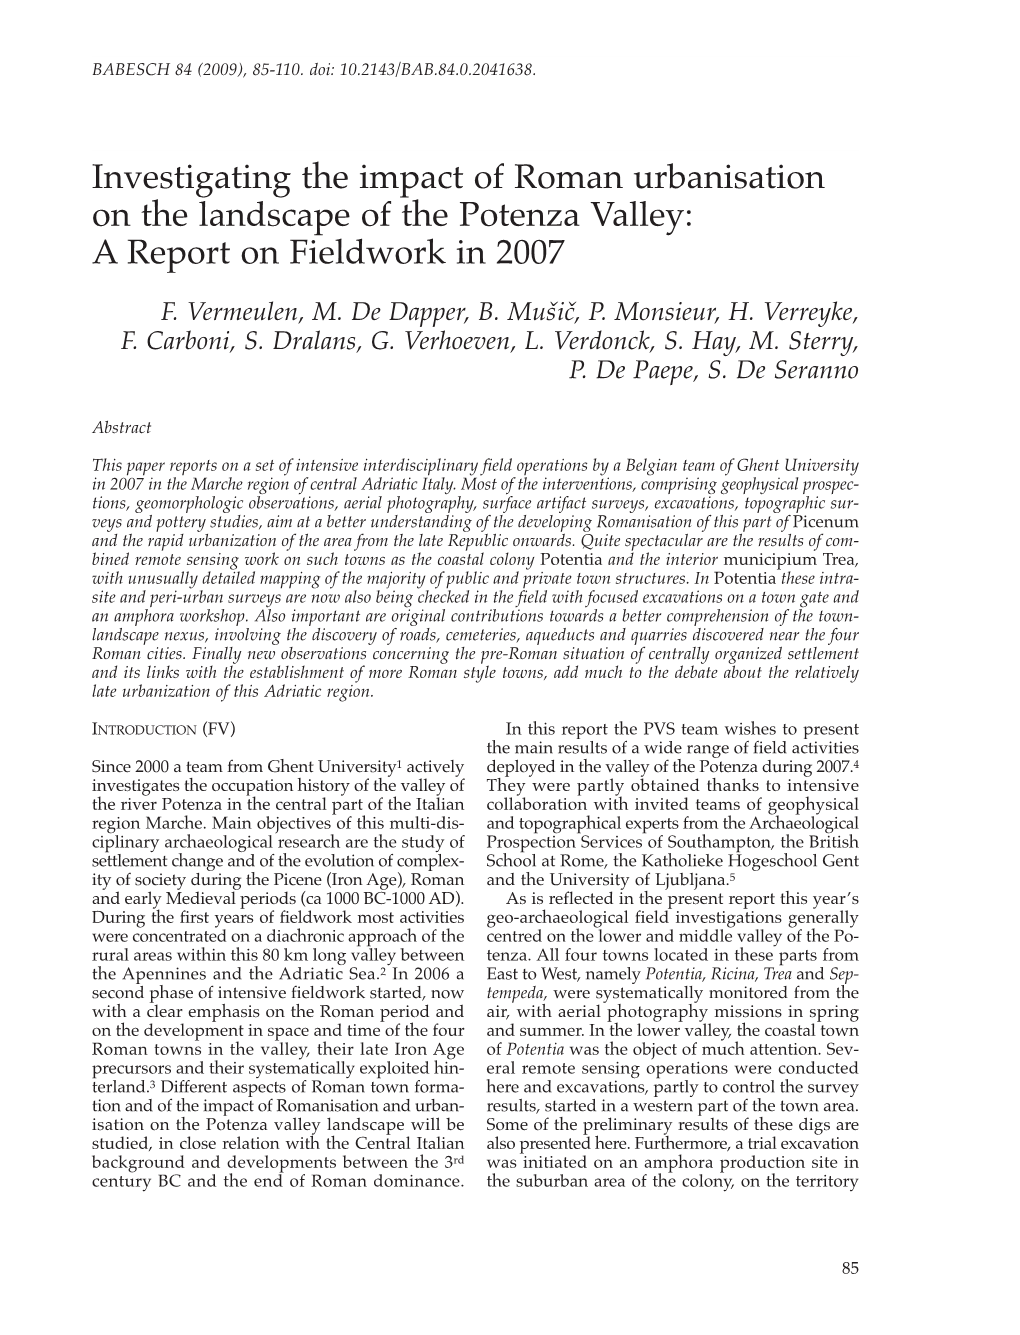 Investigating the Impact of Roman Urbanisation on the Landscape of the Potenza Valley: a Report on Fieldwork in 2007